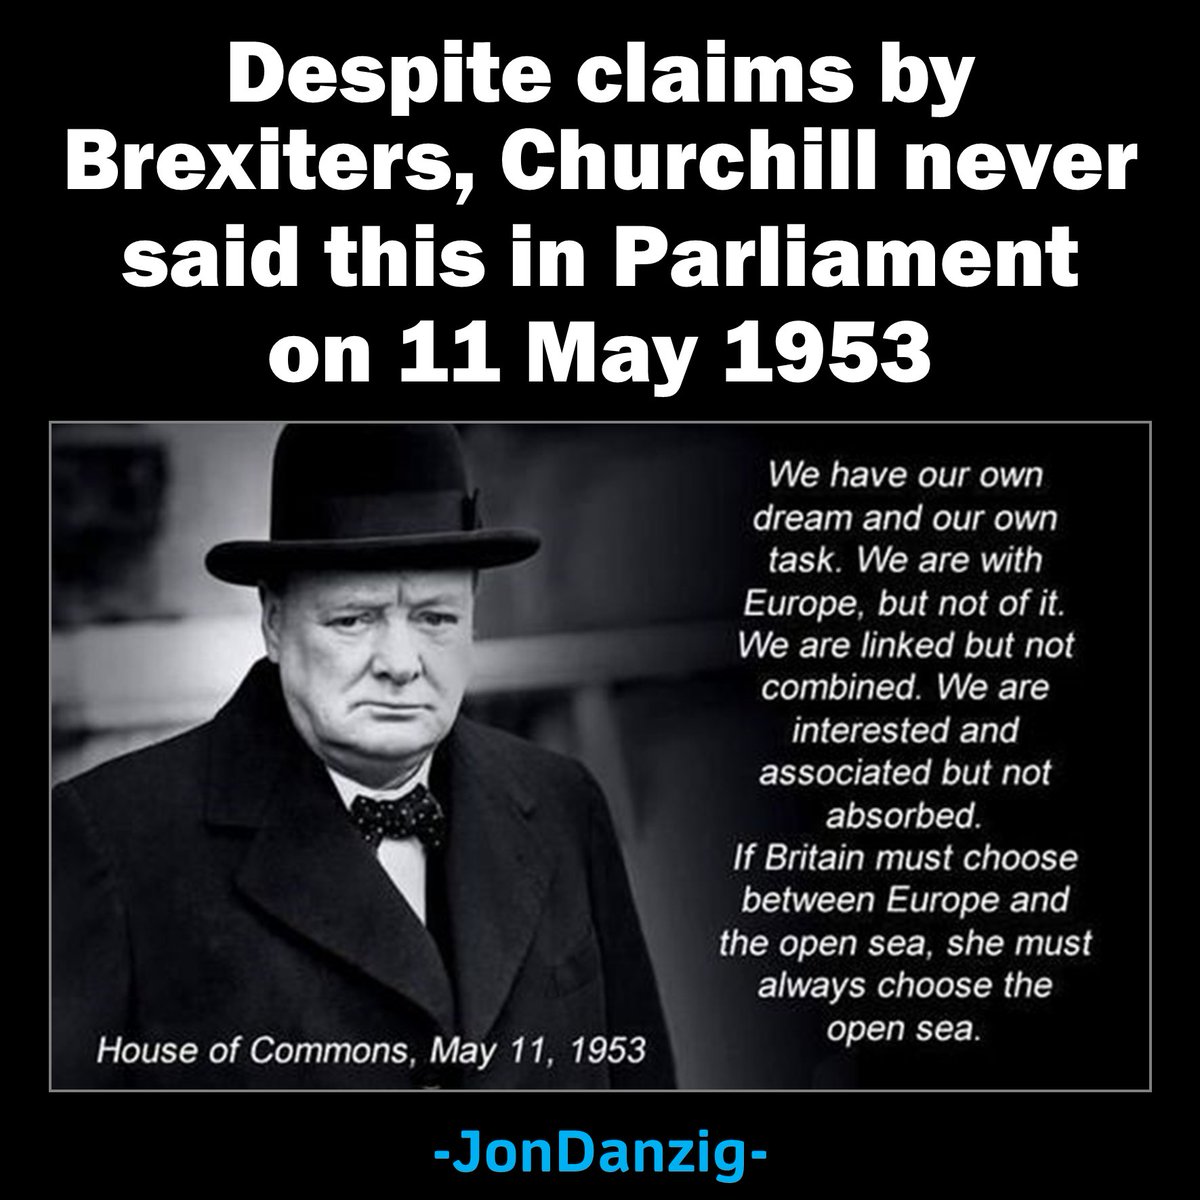 Dead people can’t sue or answer back. Maybe that’s why #Brexiters thought they could get away with fabricating a quote by #Churchill to support leaving the #EU. My full report LinkedIn: bit.ly/3Bnud41 Blog: bit.ly/3M6QbfF